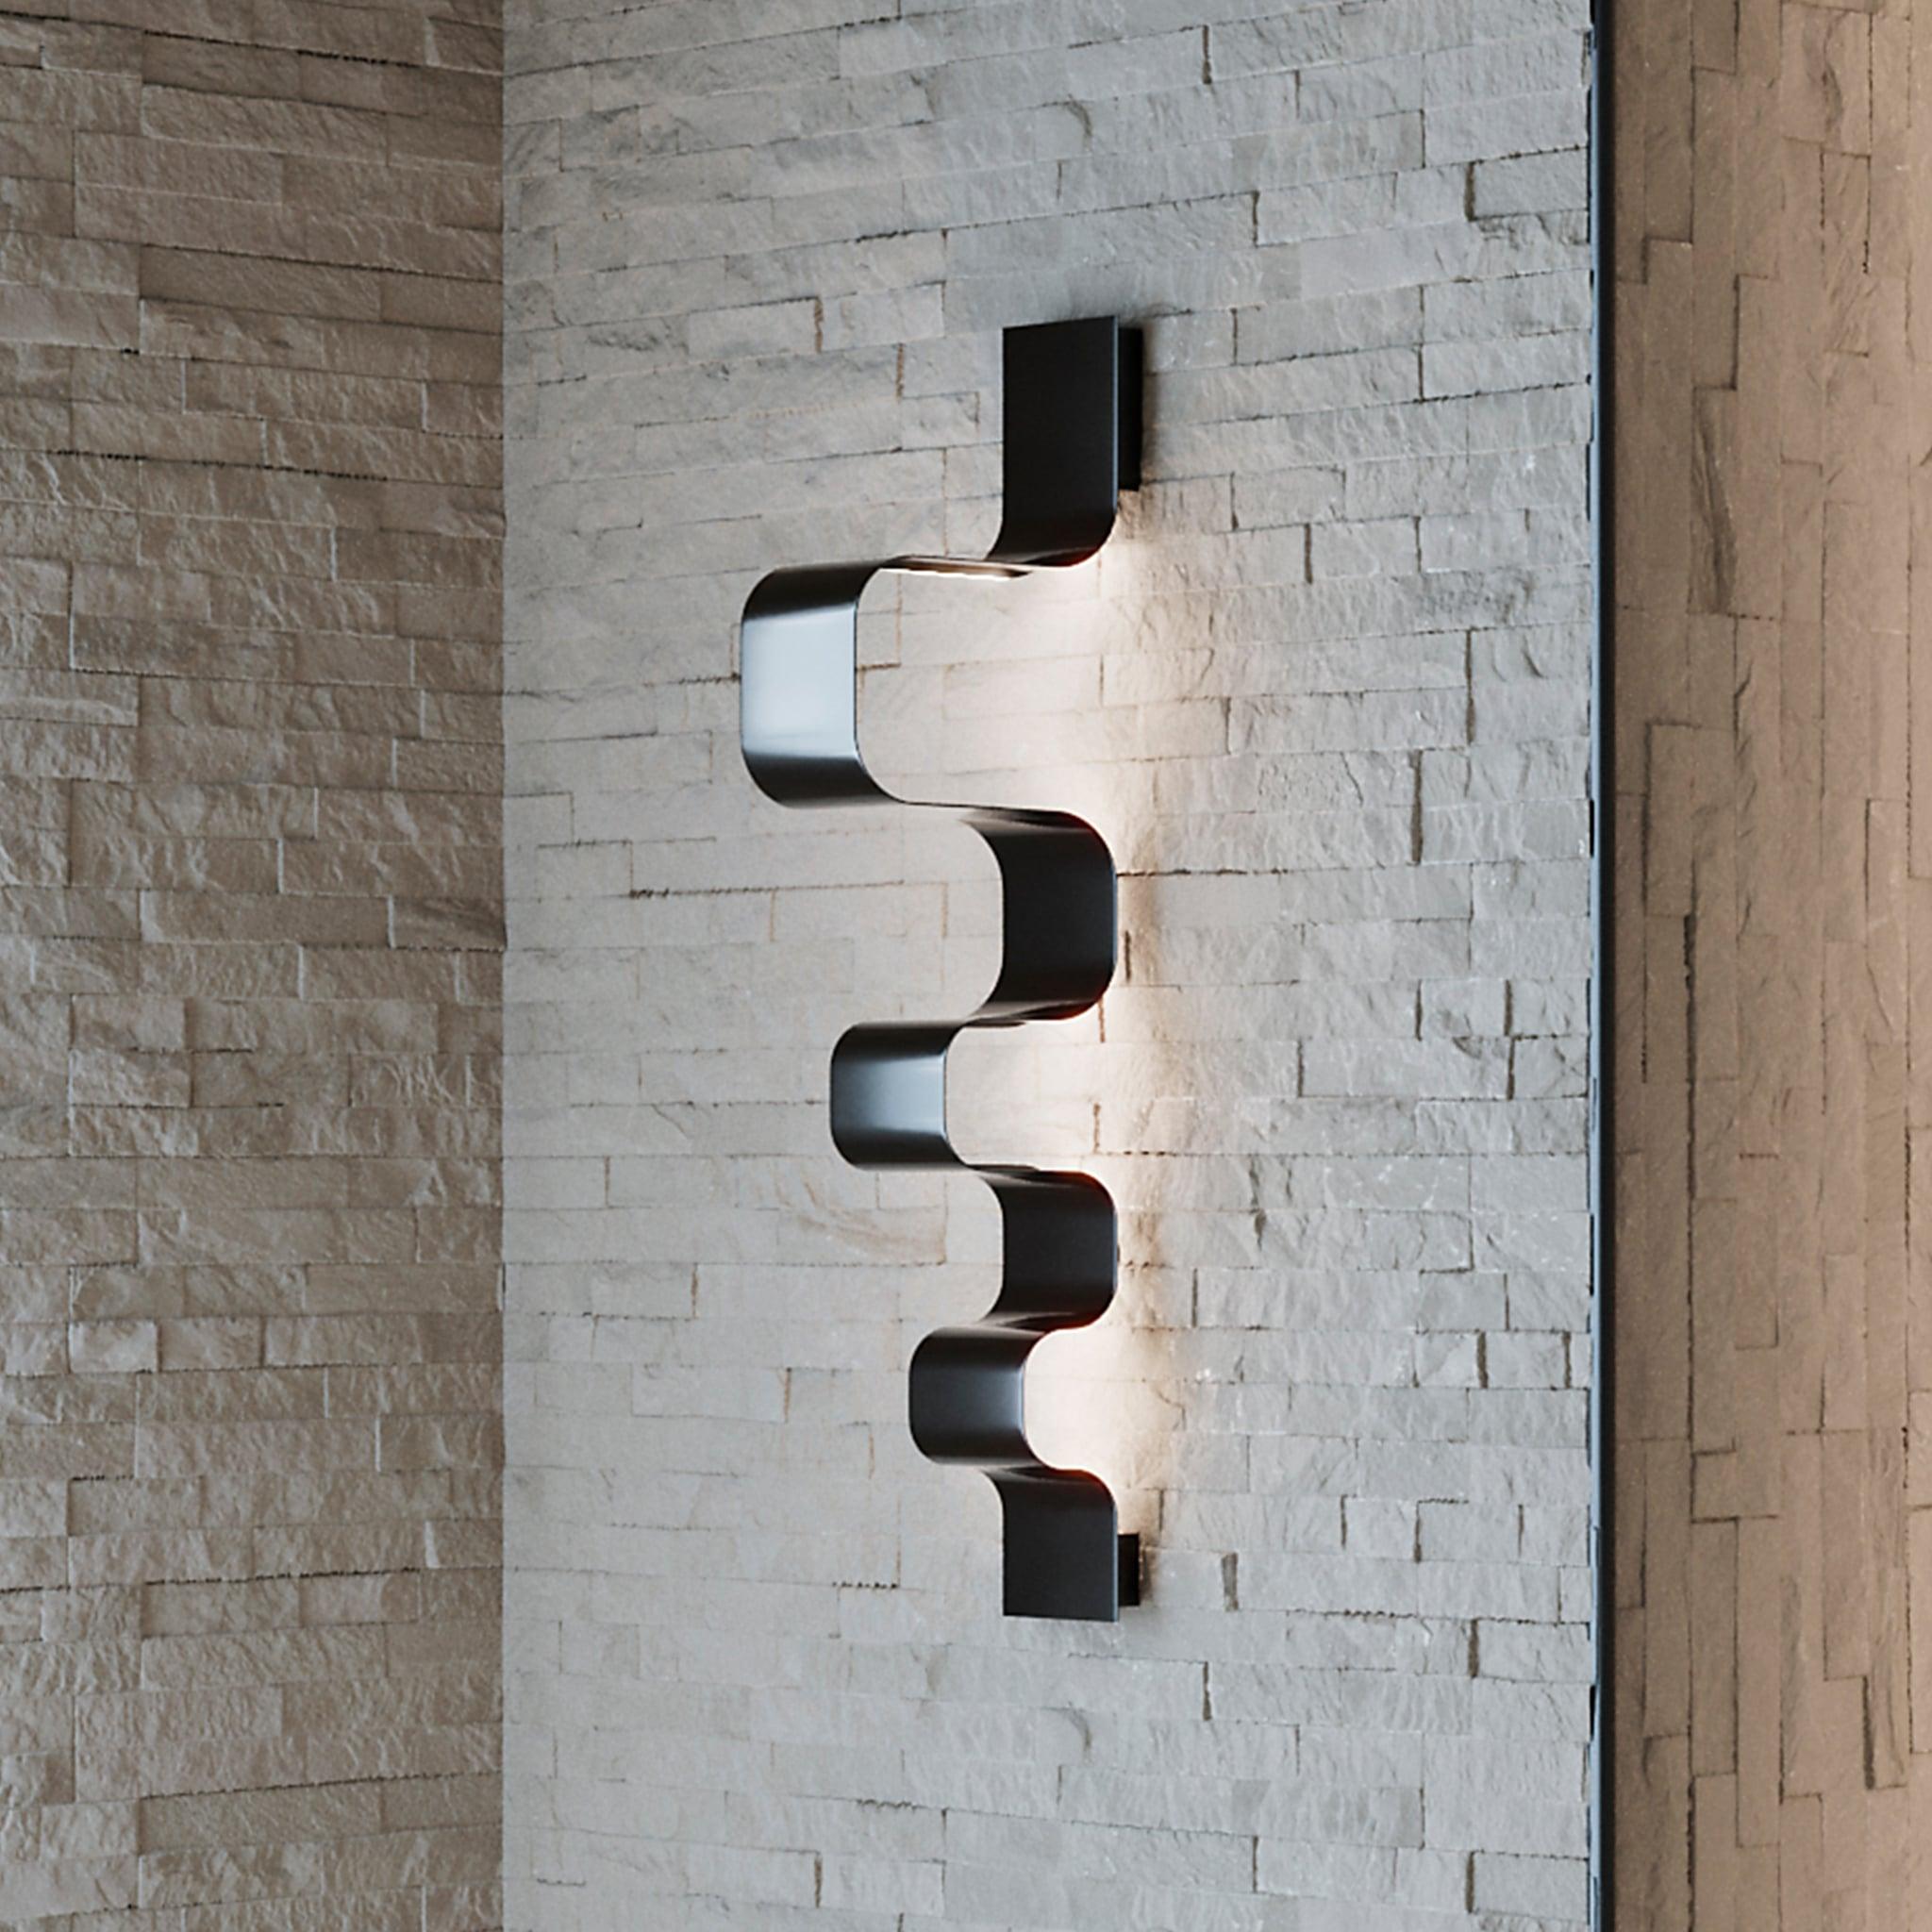 Ribon Wall Lamp Black is a modern wall lamp in brass with black finish and a futuristic flair.
The sophisticated wall lamp emanates a warm and seductive light into the space, resulting from simple materials and simple construction.
Luxurious yet